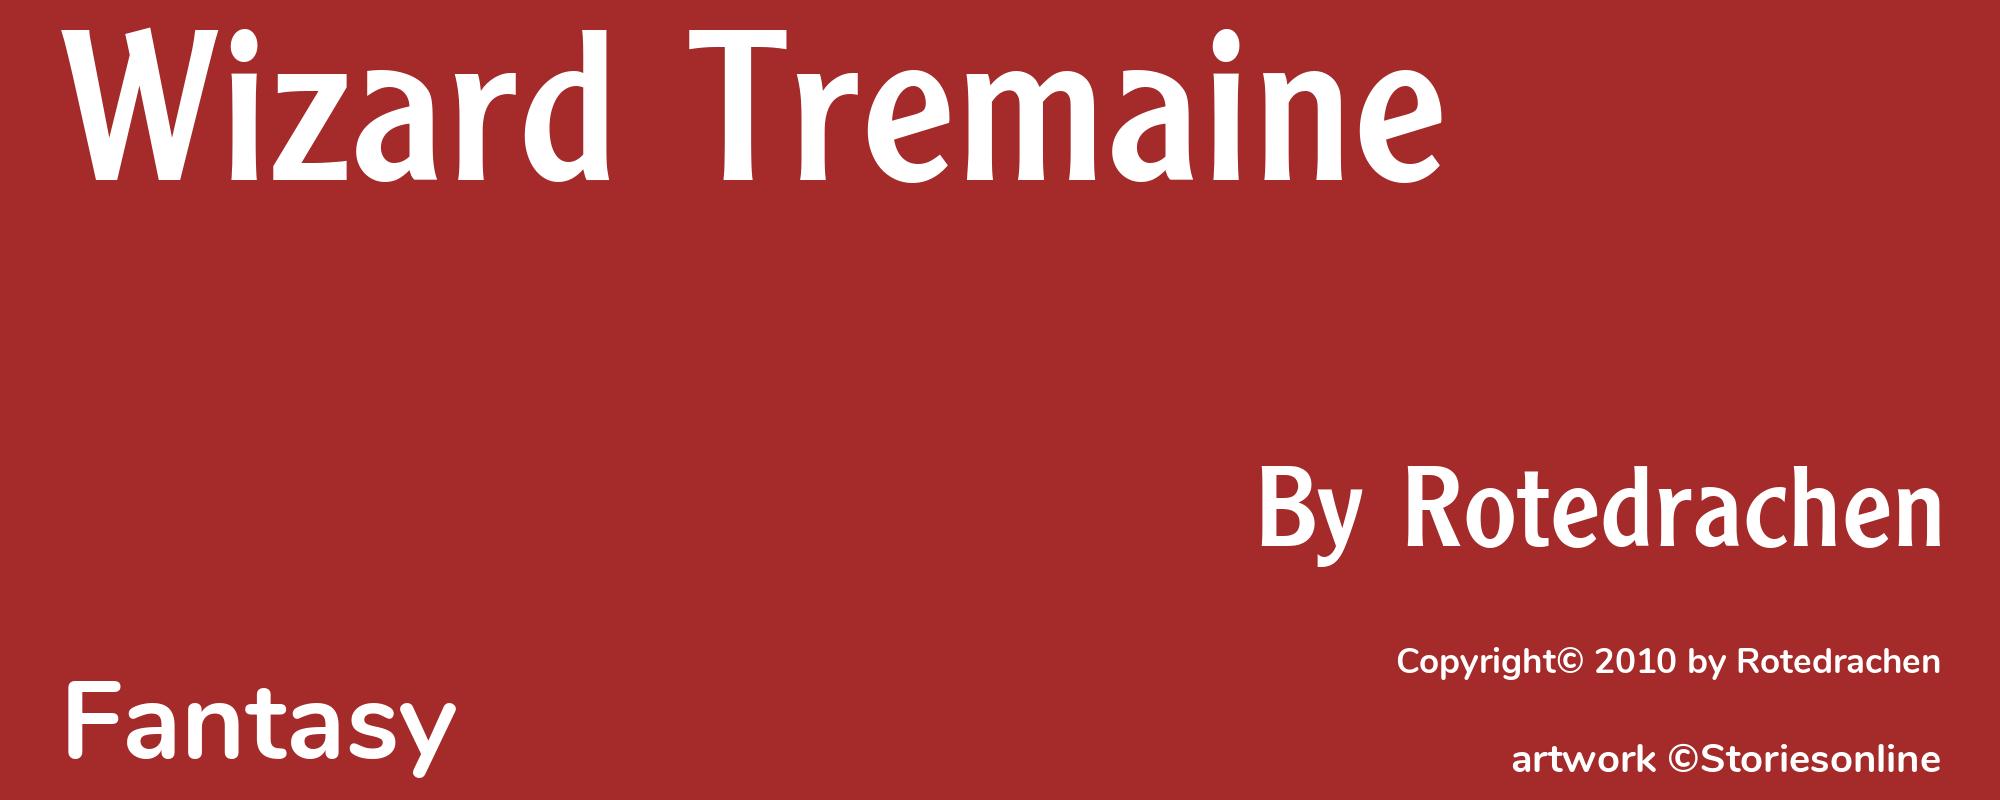 Wizard Tremaine - Cover